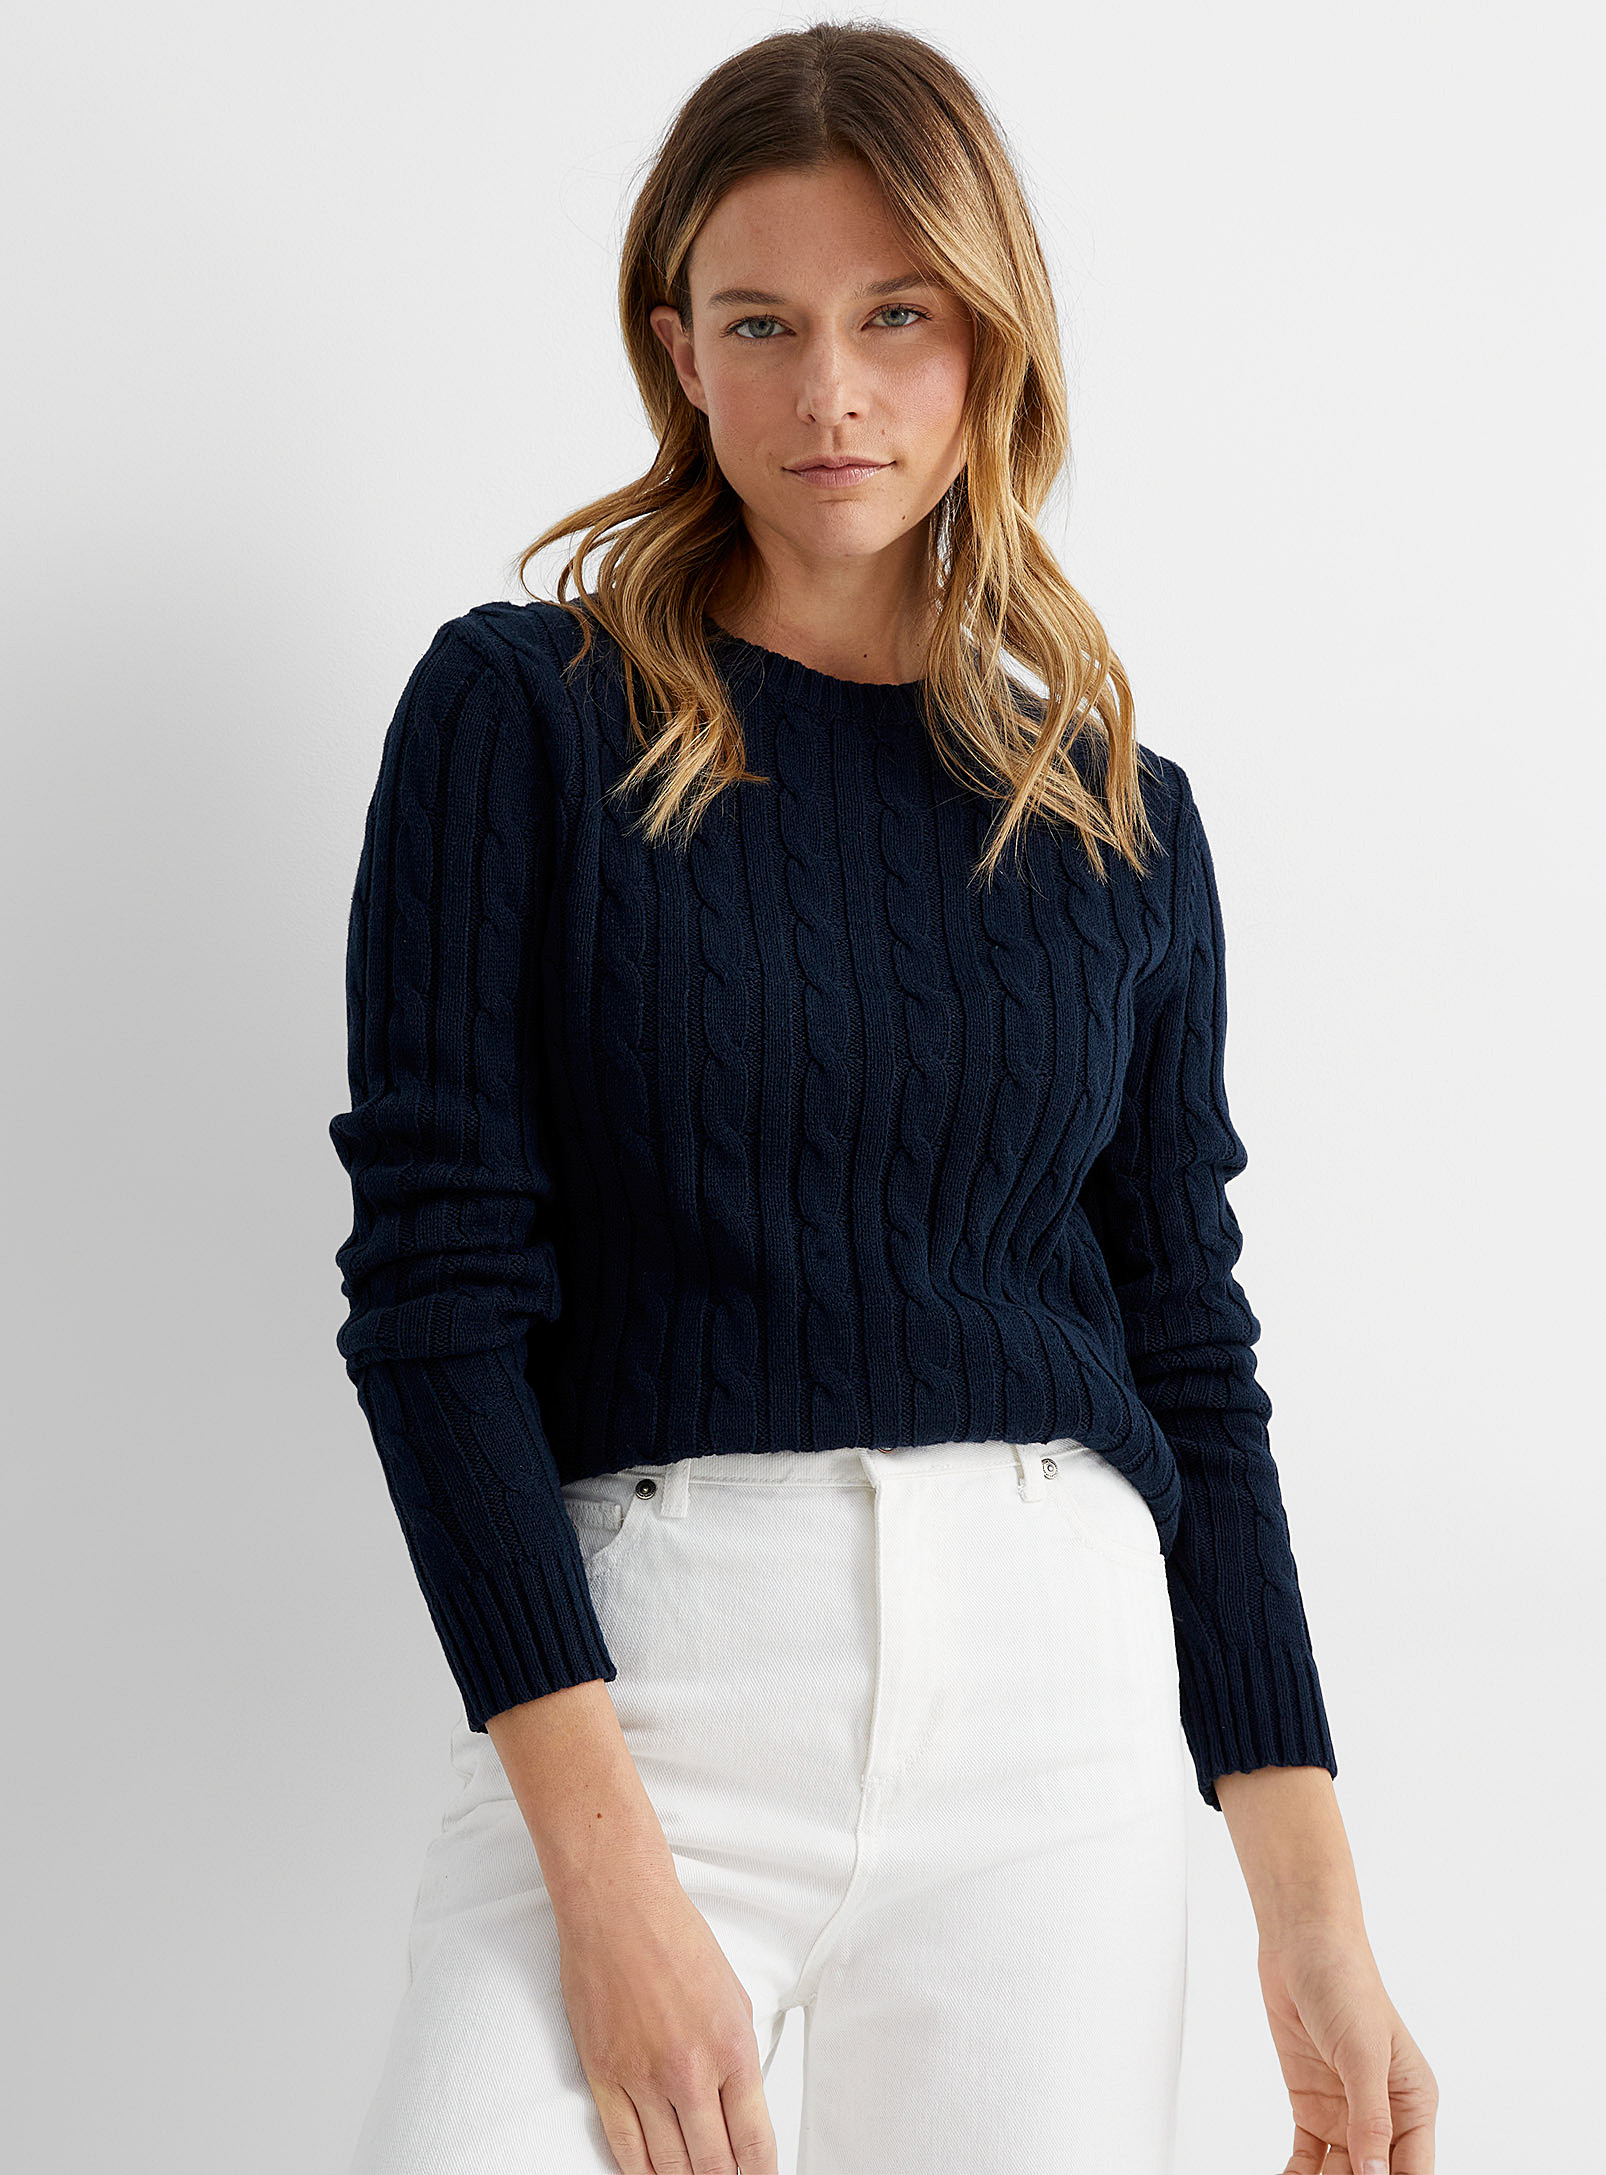 Contemporaine - Women's Twisted cable crew-neck sweater